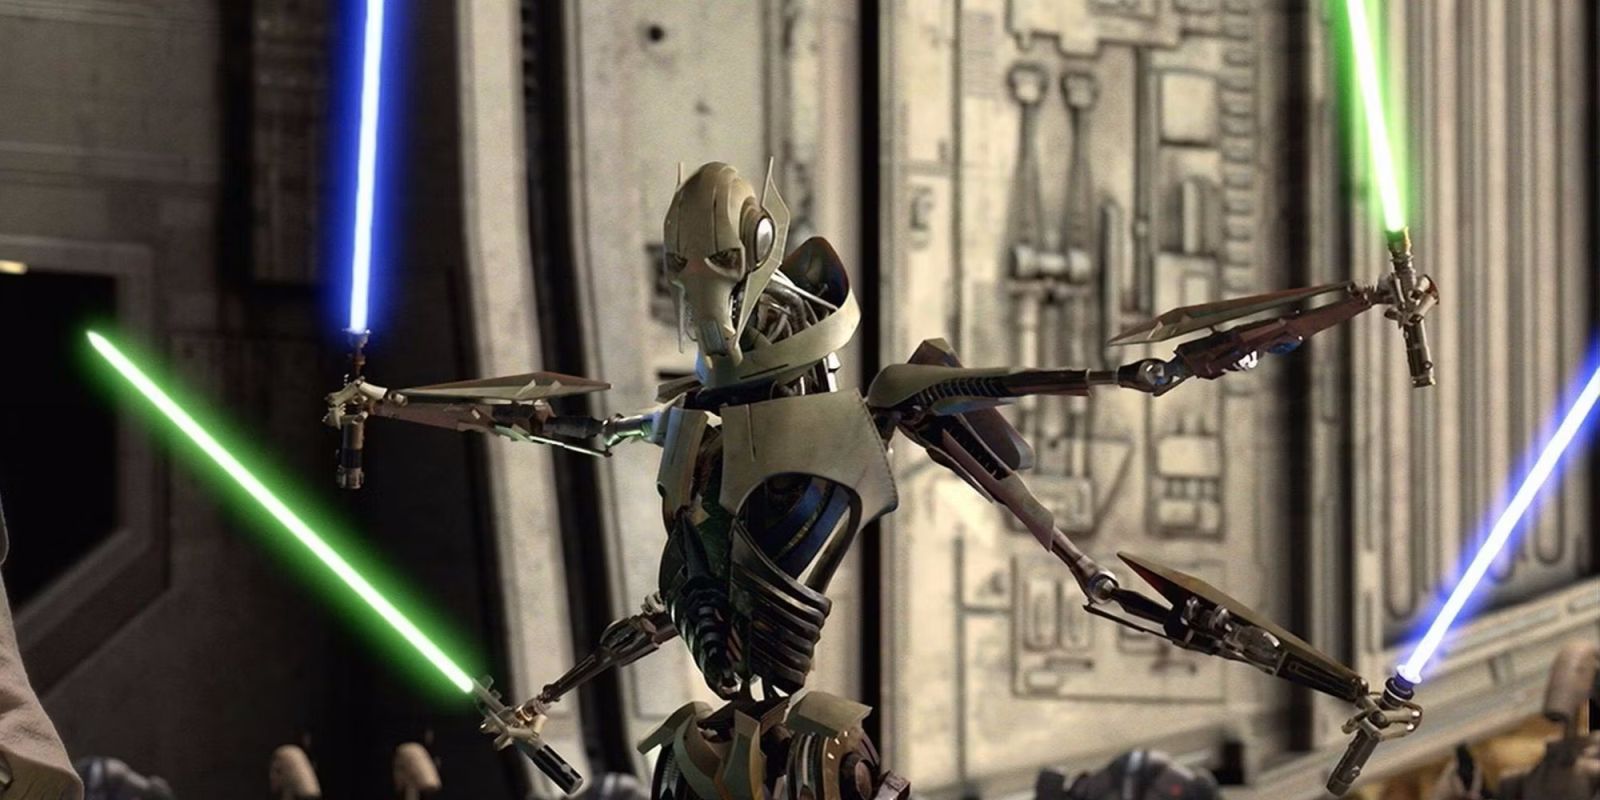 General-Grievous-with-all-four-lightsabers-in-Revenge-of-the-Sith